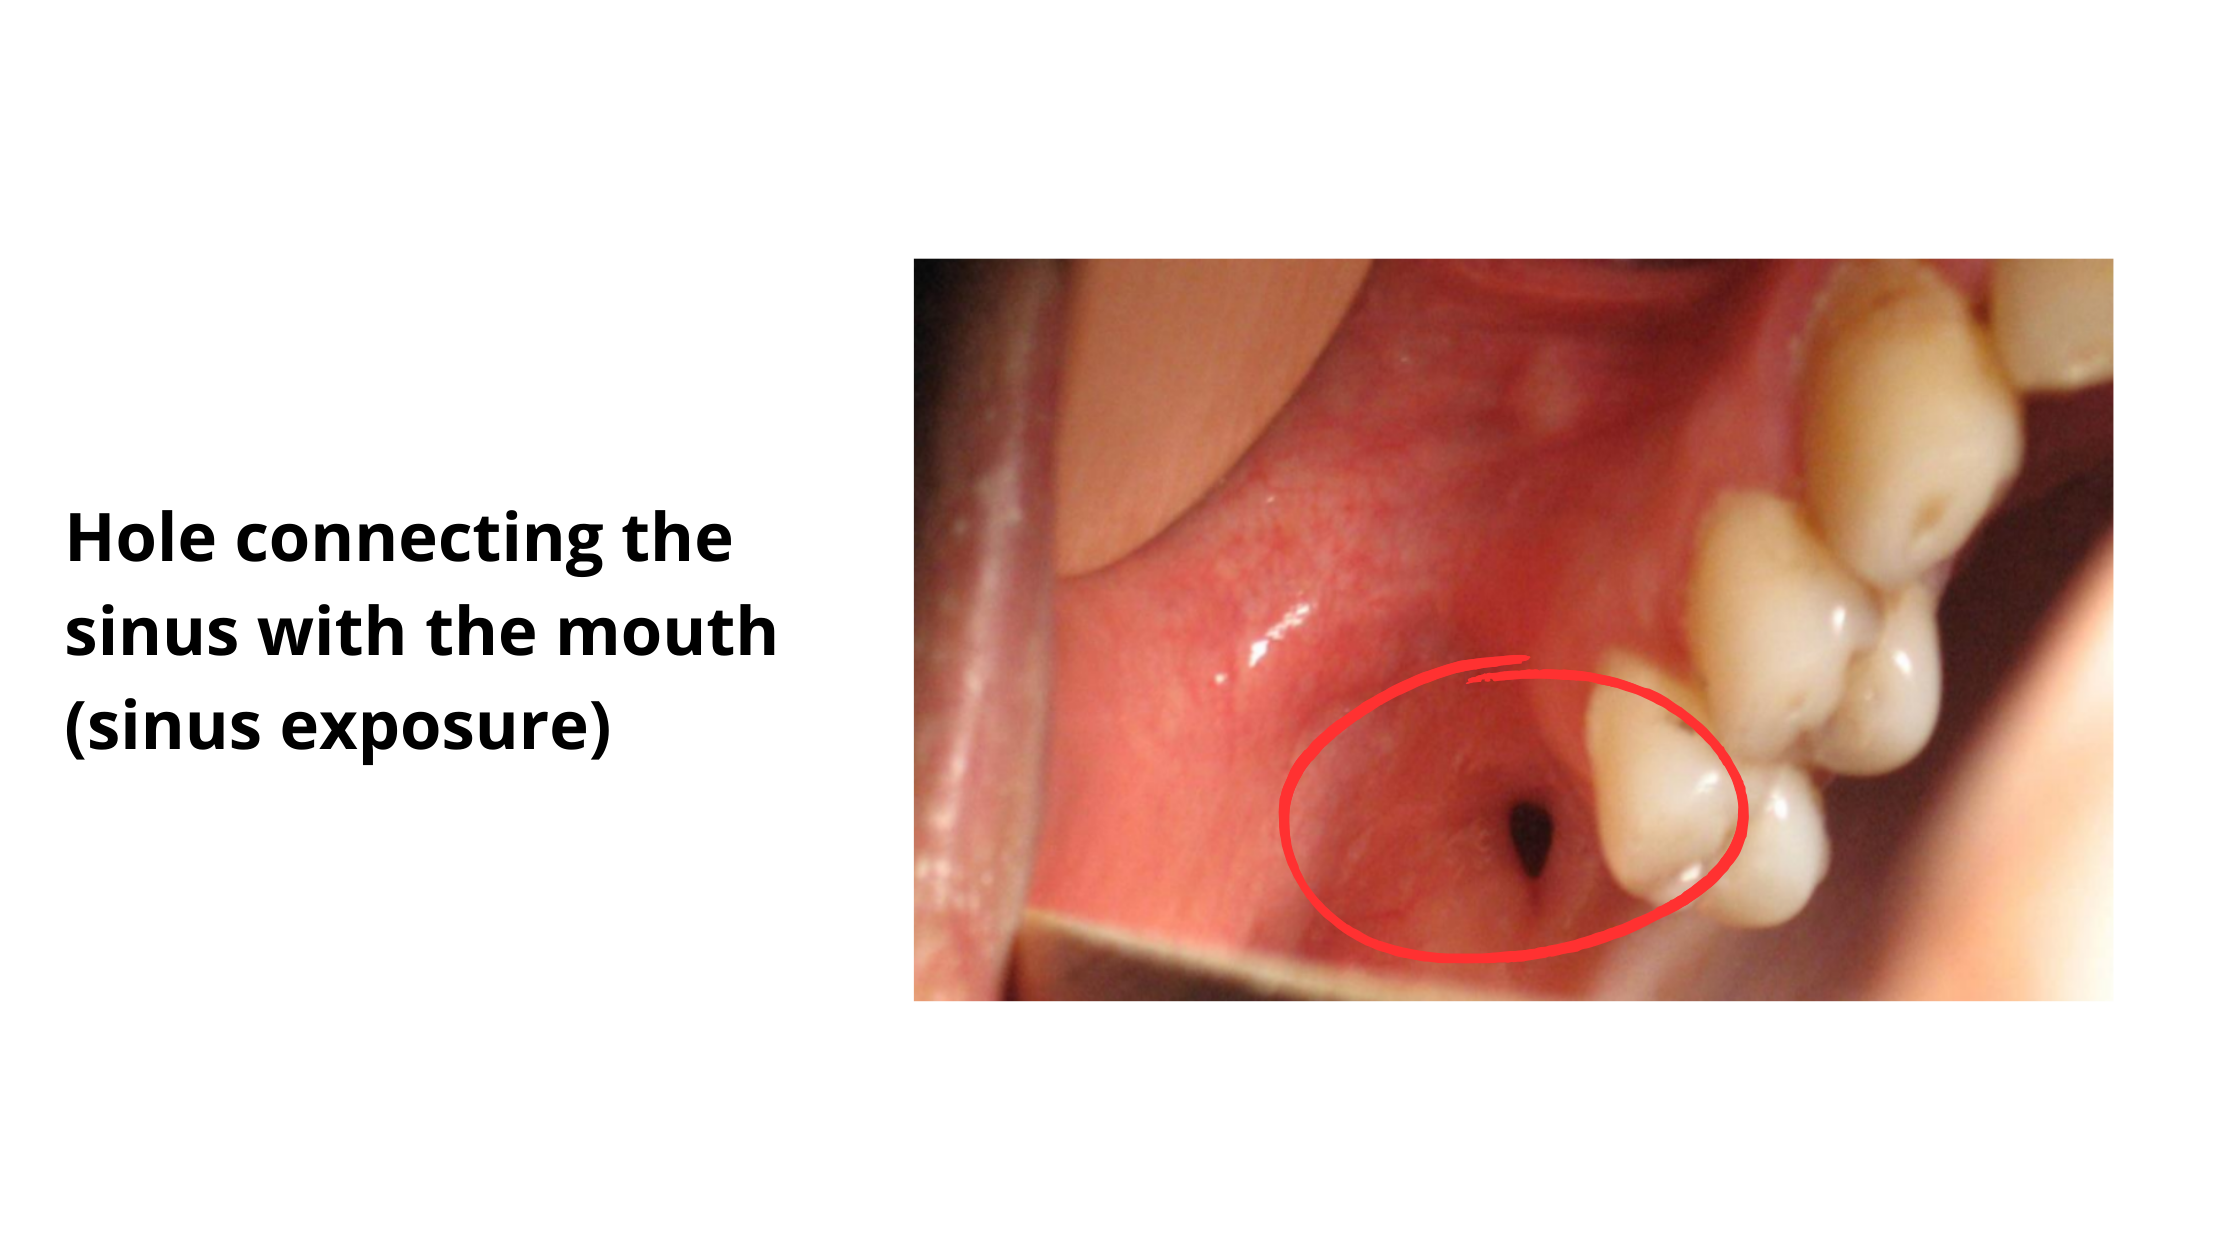 Clinical image showing a hole connecting the mouth to the sinus, resulting in oro-antral communication